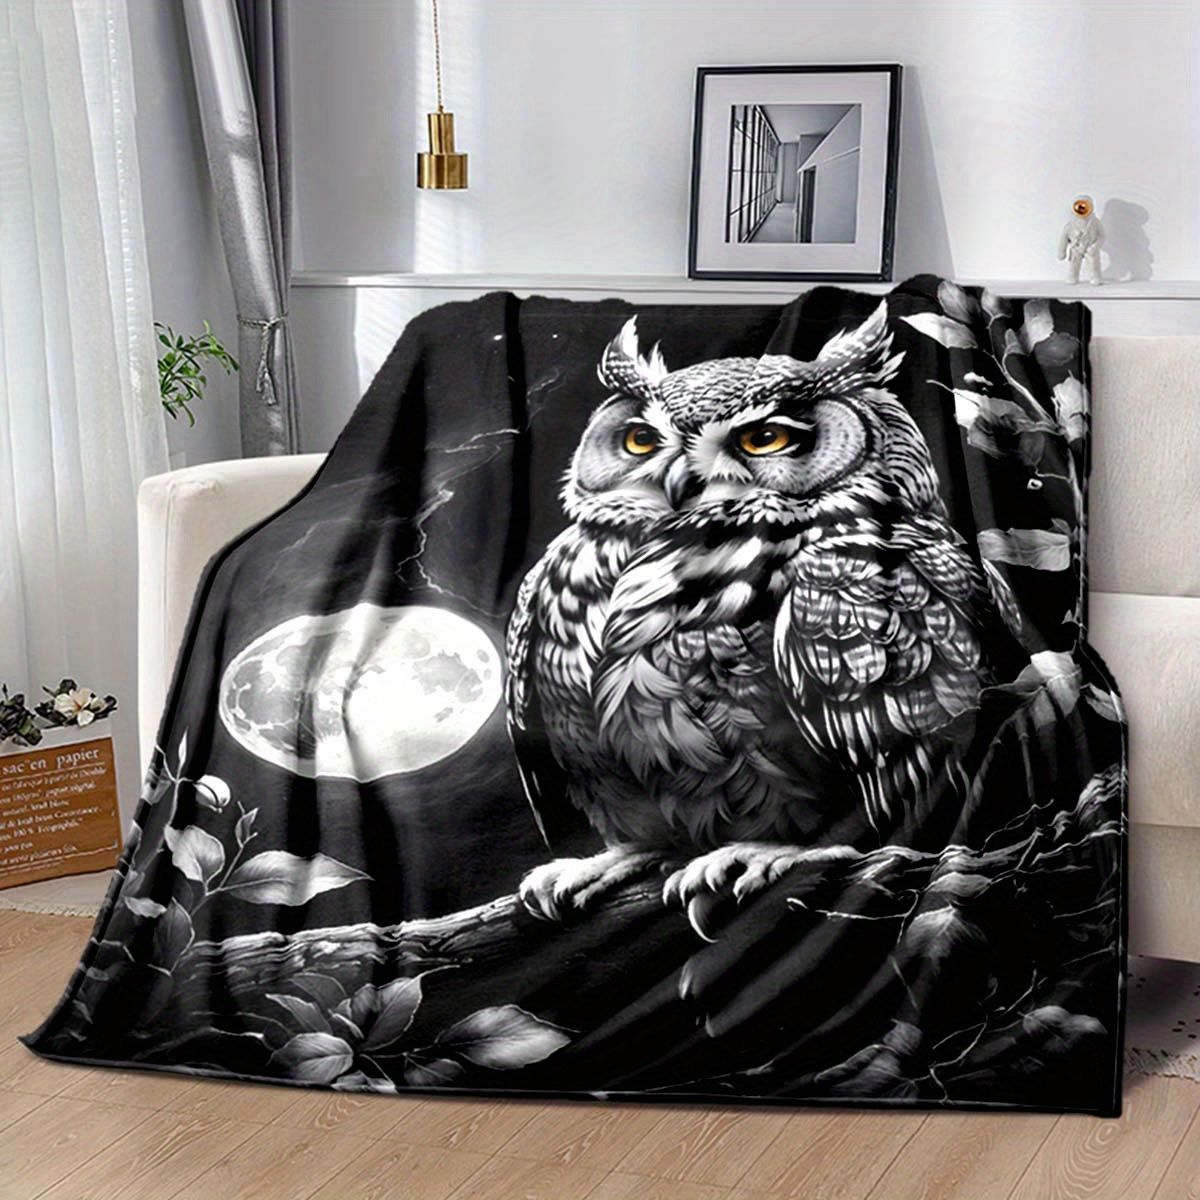 

Cozy Owl Print Flannel Throw Blanket - Soft, Warm & Durable For Couch, Sofa, Office, Bed, Camping, Rv, Car Travel - Versatile Holiday Gift, Multiple Sizes Available